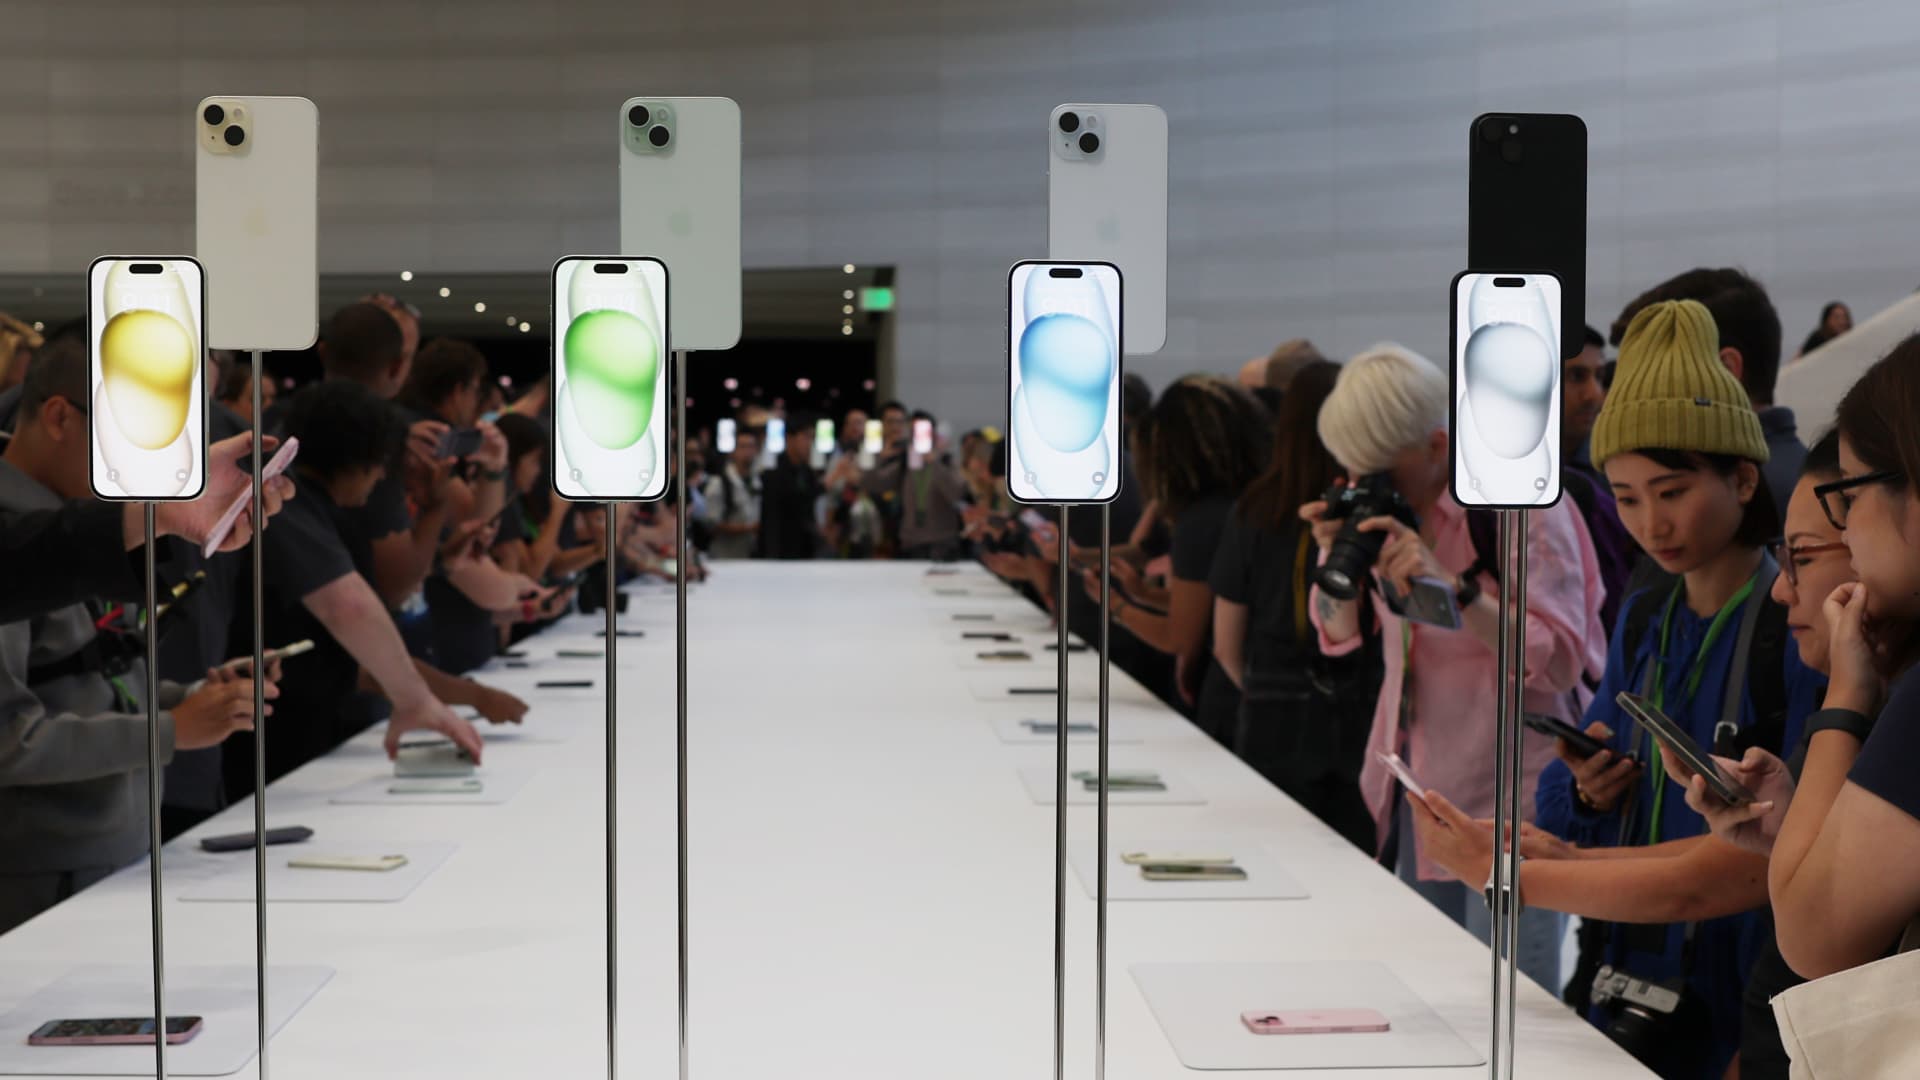 Attendees look at brand-new Apple products during an Apple event at the Steve Jobs Theater at Apple Park in Cupertino, California, Sept. 12, 2018.